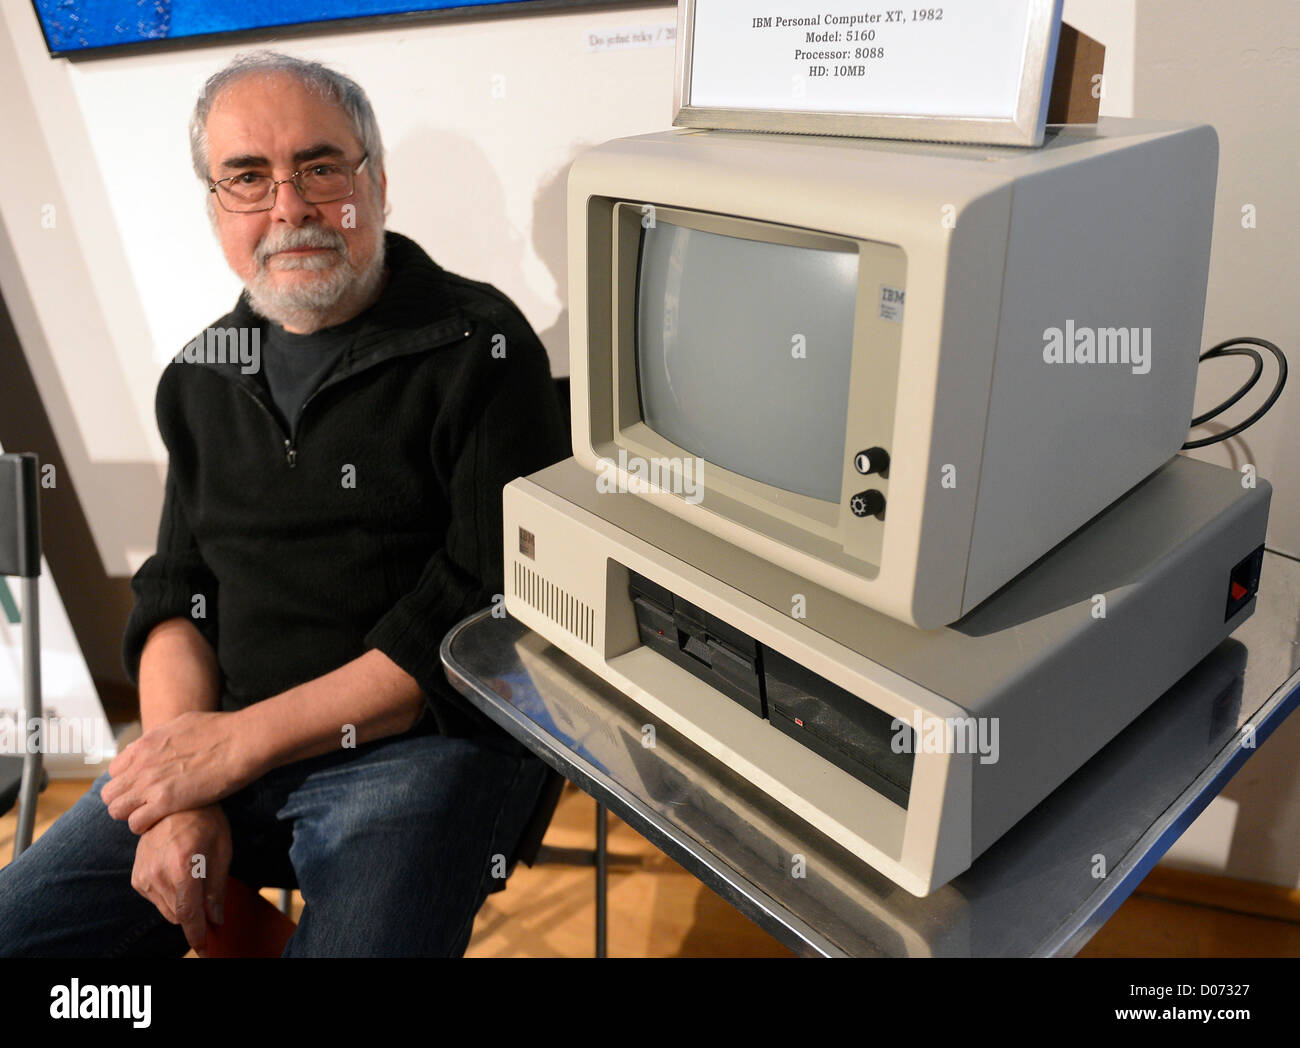 Vladimir Hanzel, former personal secretary of Vaclav Havel poses with an old IBM computer which the former Czech president Vaclav Havel used in 1980s. Vaclav Havel Library received this computer into its collection in Prague, Czech Republic on November 19, 2012. (CTK Photo/Michal Dolezal) Stock Photo